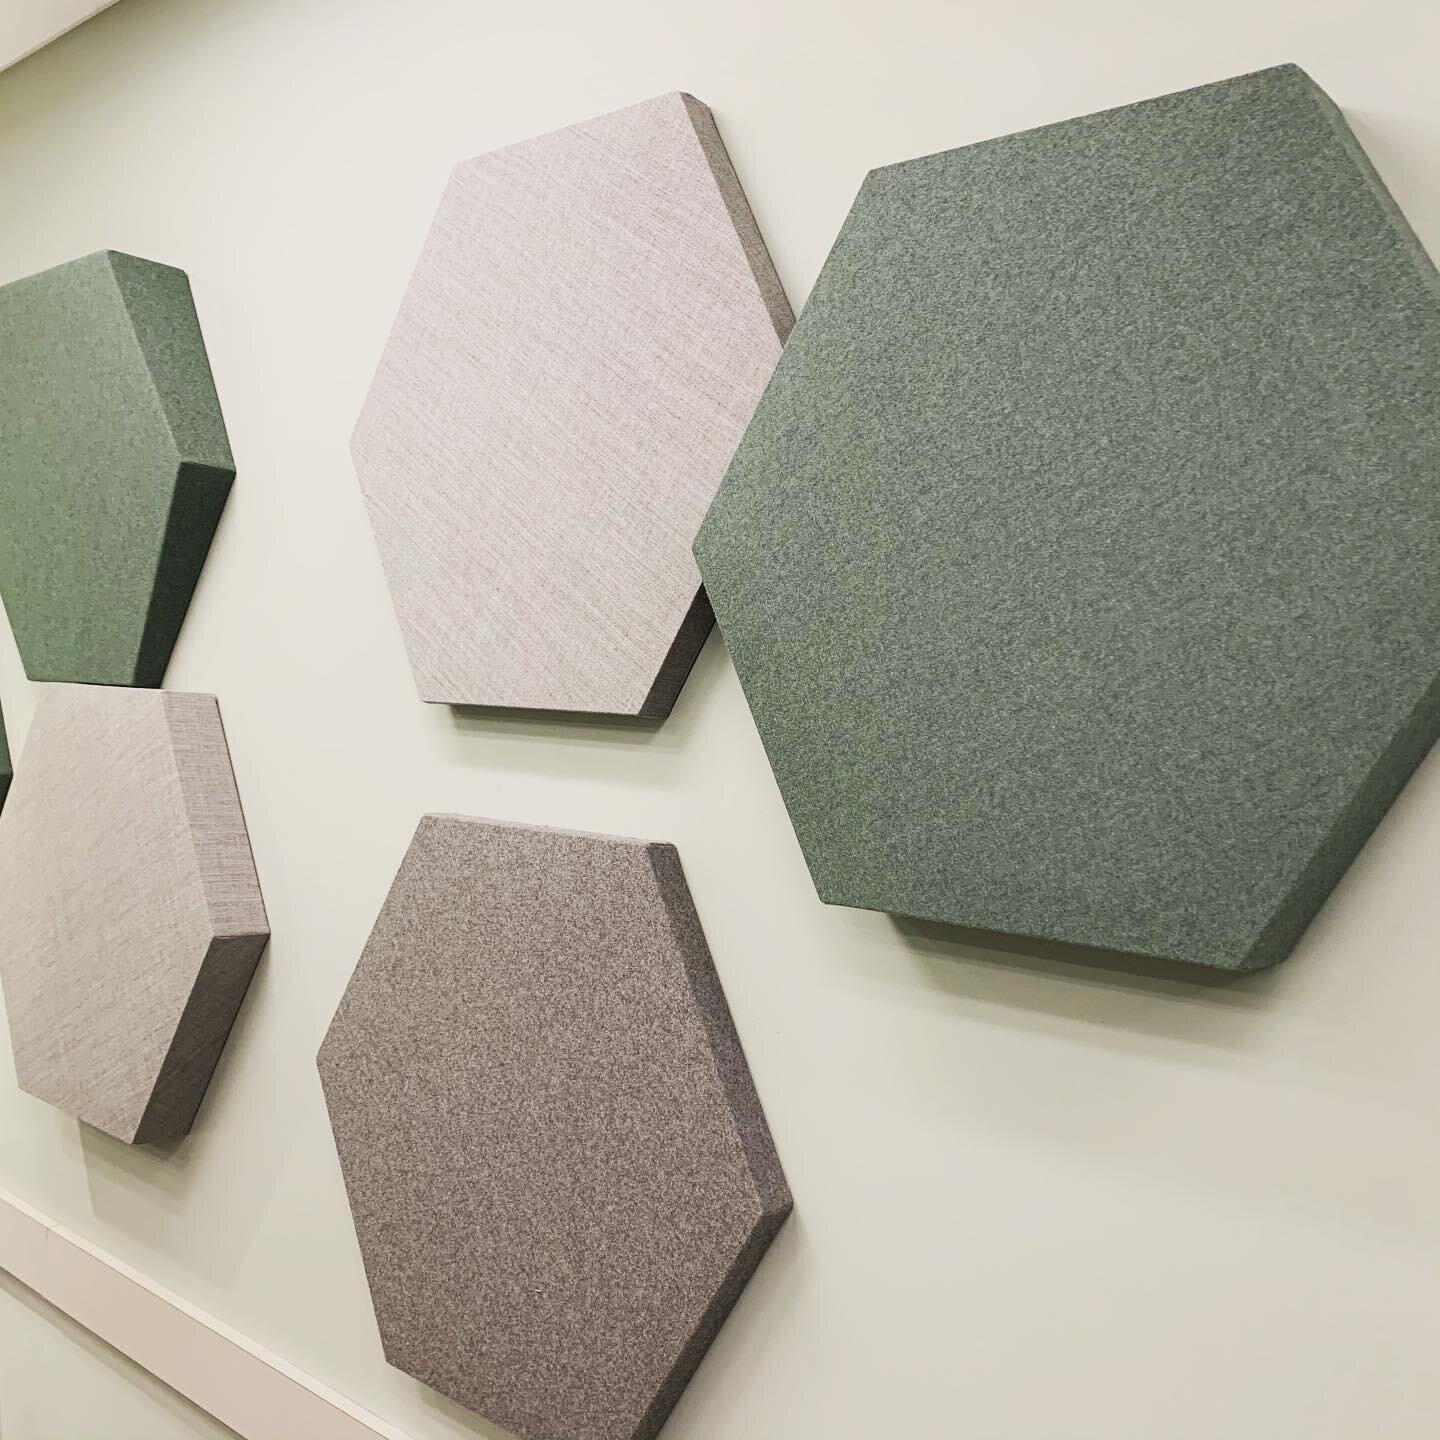 Hearing rooms servicing new Canadians get a playful acoustical upgrade with these @buzzispace  panels 😊

@rgo.ca #choicecontracting @opus_elements